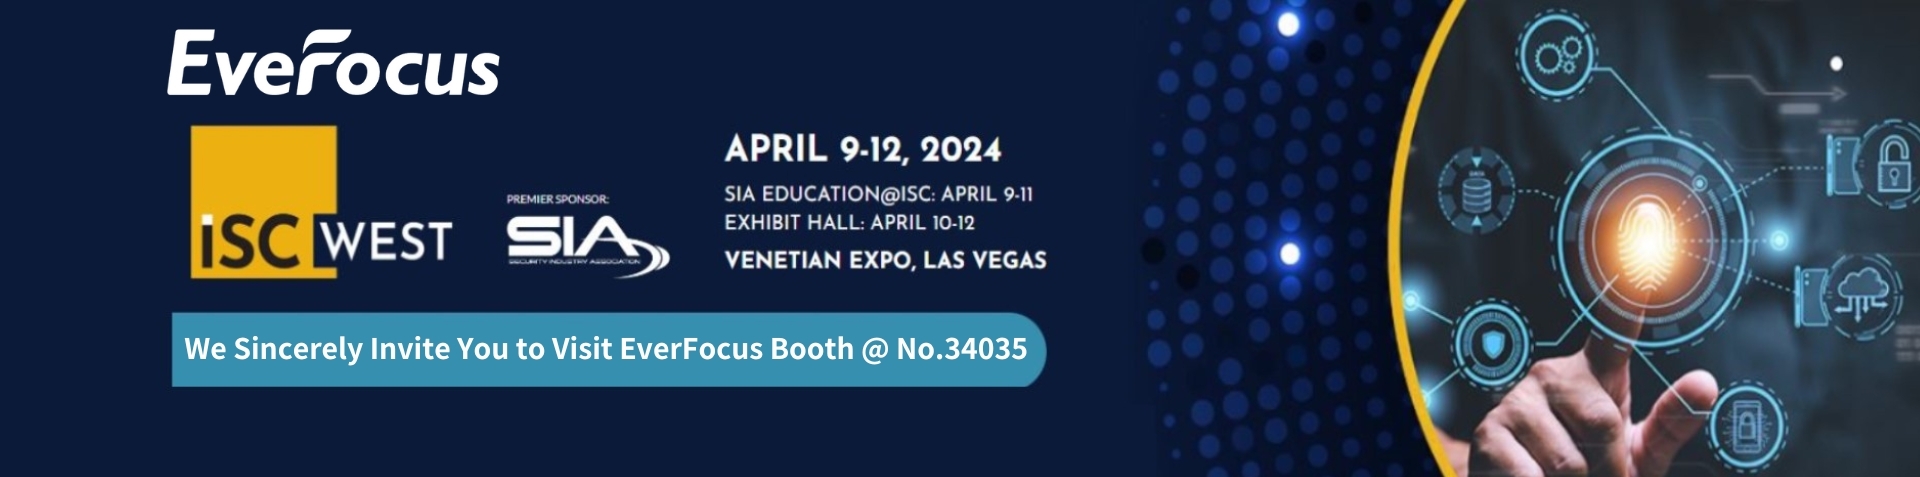 EverFocus to Showcase Cutting-Edge IoT Solutions at ISC West 2024